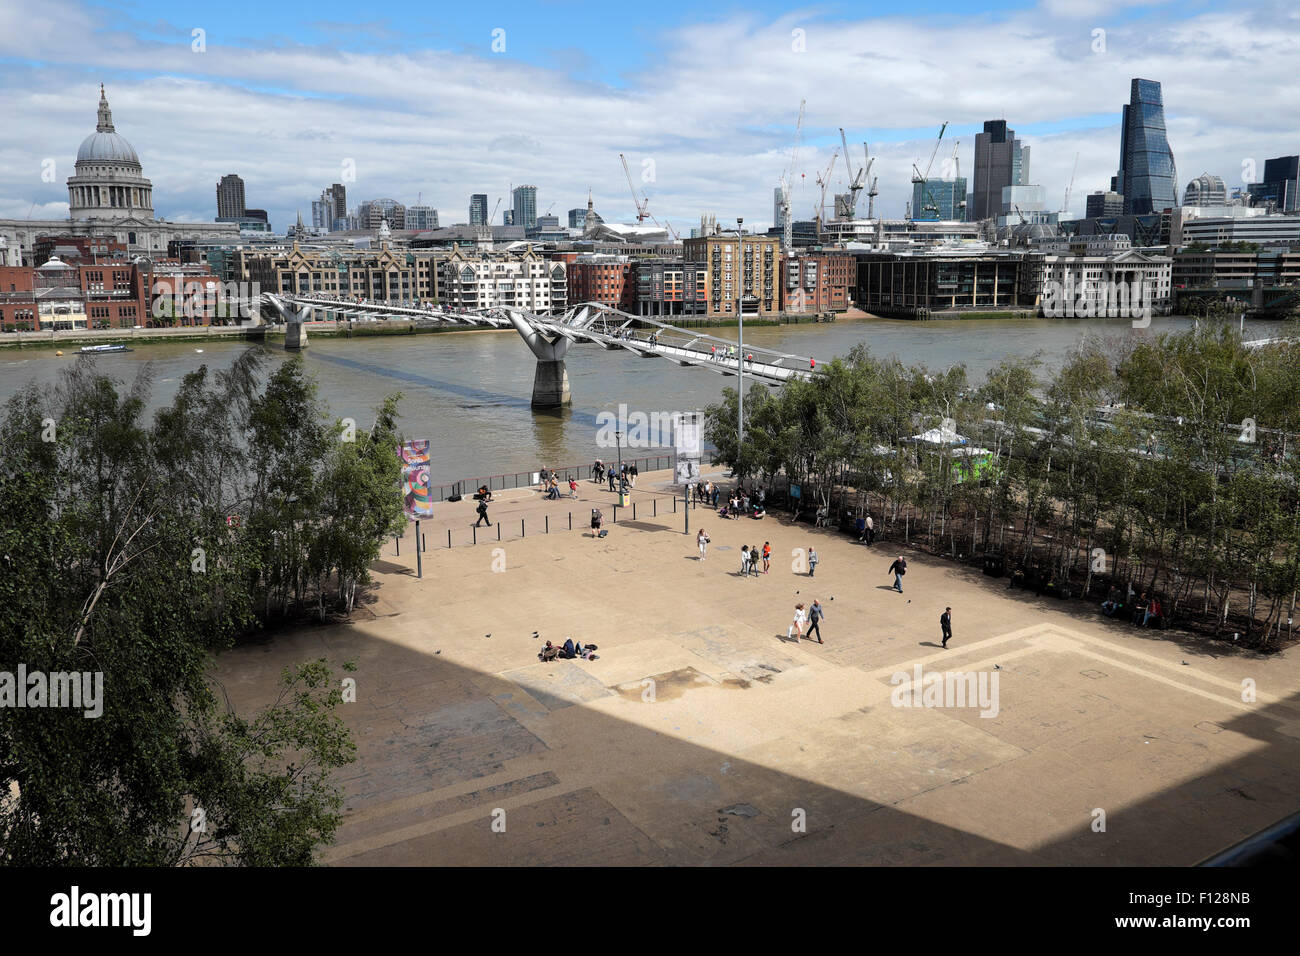 View of St Paul's Cathedral, River Thames, Millennium Bridge and the City of London from Tate Modern Art Gallery London UK  KATHY DEWITT Stock Photo